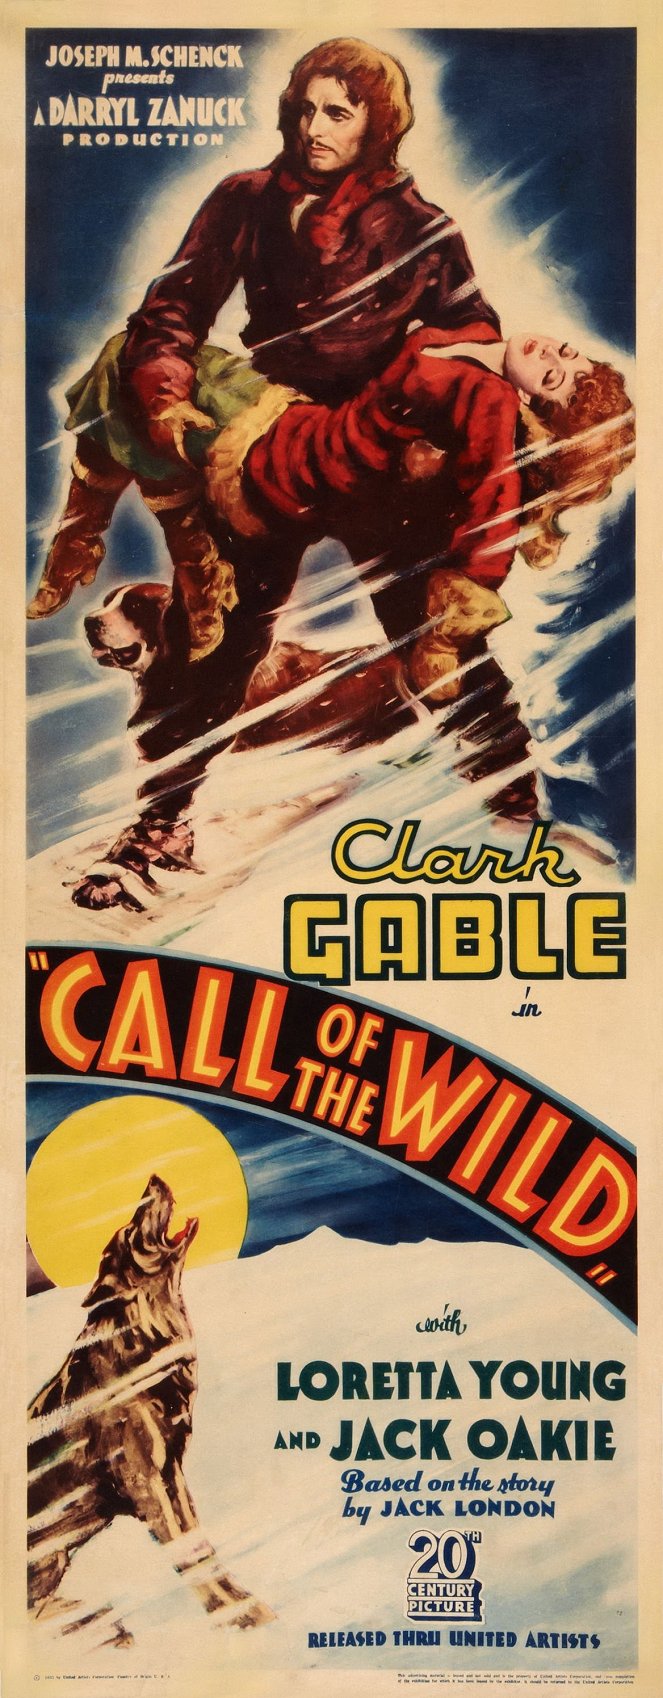 The Call of the Wild - Posters